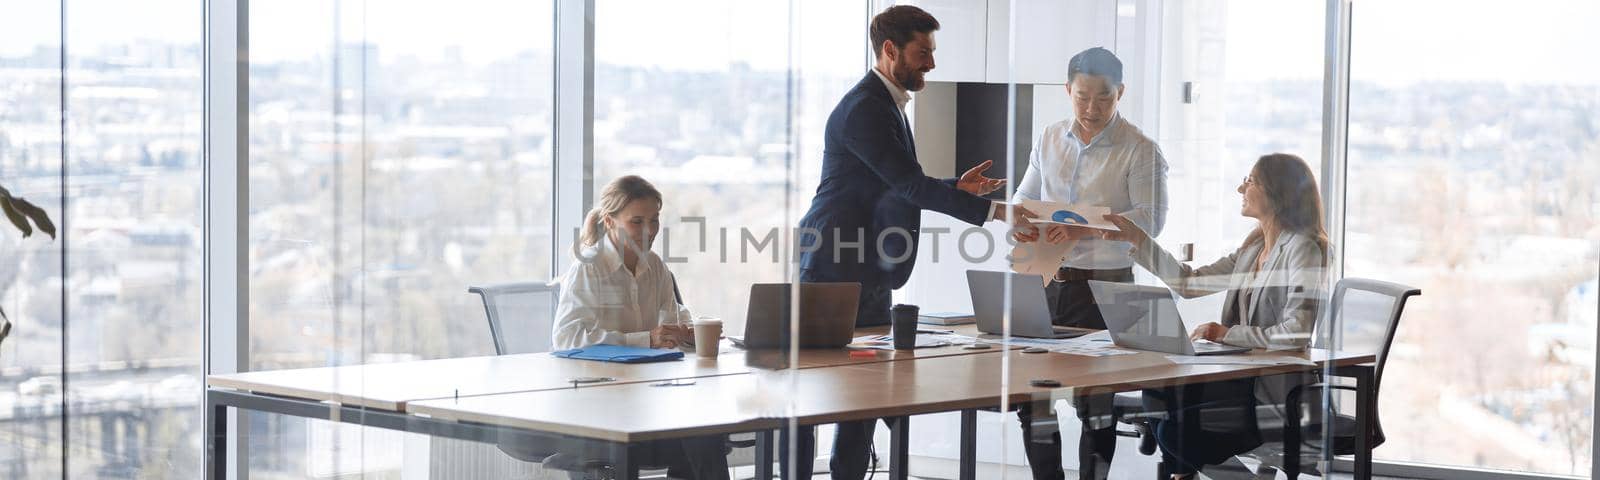 People standing near table, team of young businessmen working and communicating together in office.